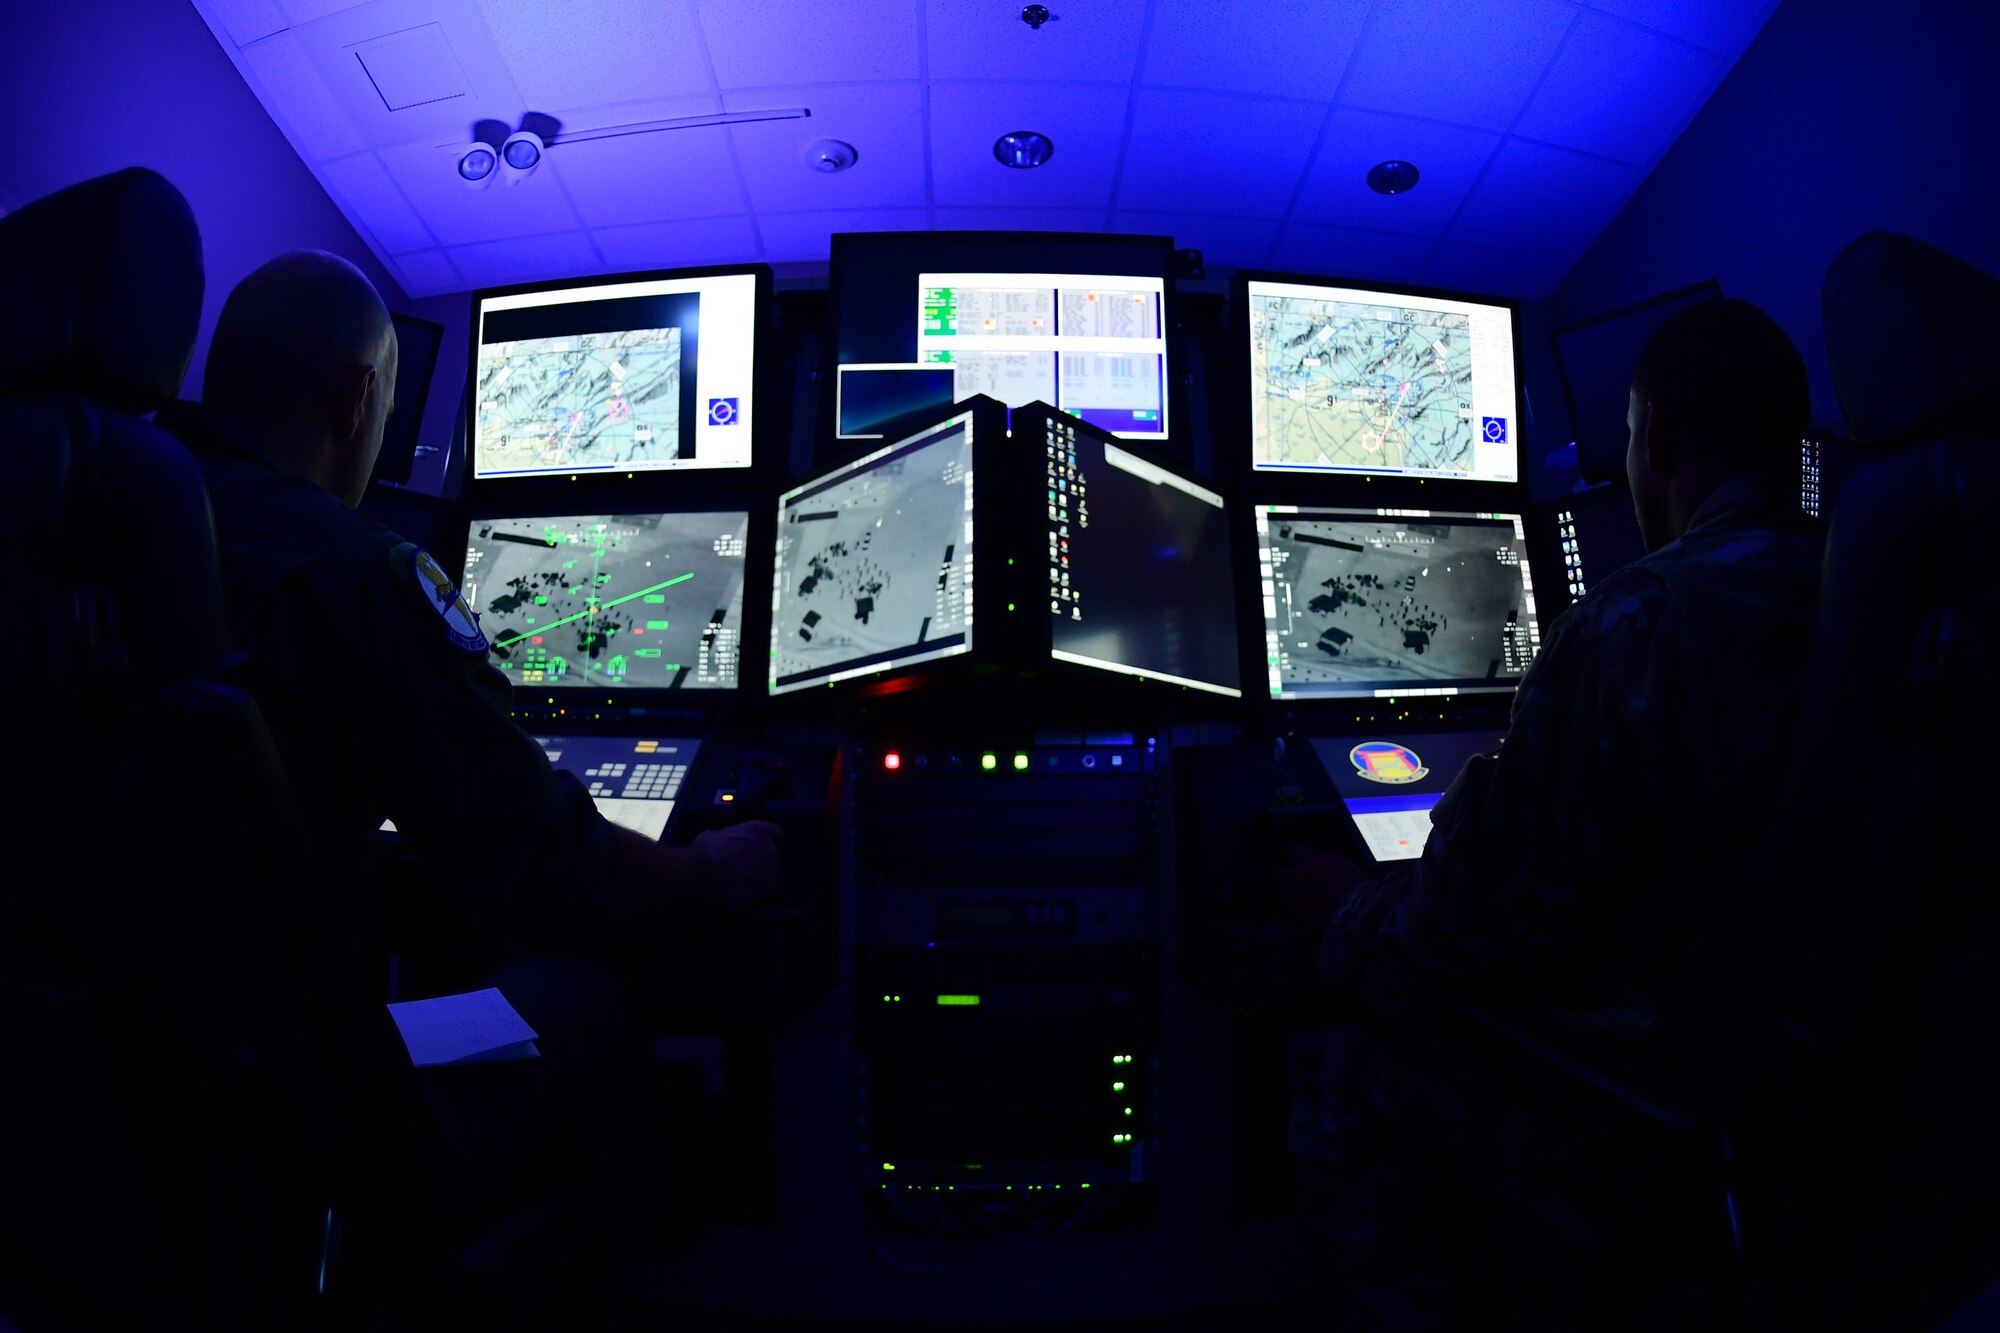 Remotely Piloted Aircraft aircrew fly simulated missions in an MQ-9 Reaper cockpit at Creech Air Force Base, Nevada, Sept. 4, 2019. The RPA mission is supported by Airmen in a variety of roles, including intelligence analysts, air traffic controllers and maintenance professionals. (U.S. Air Force photo by Senior Airman Haley Stevens)